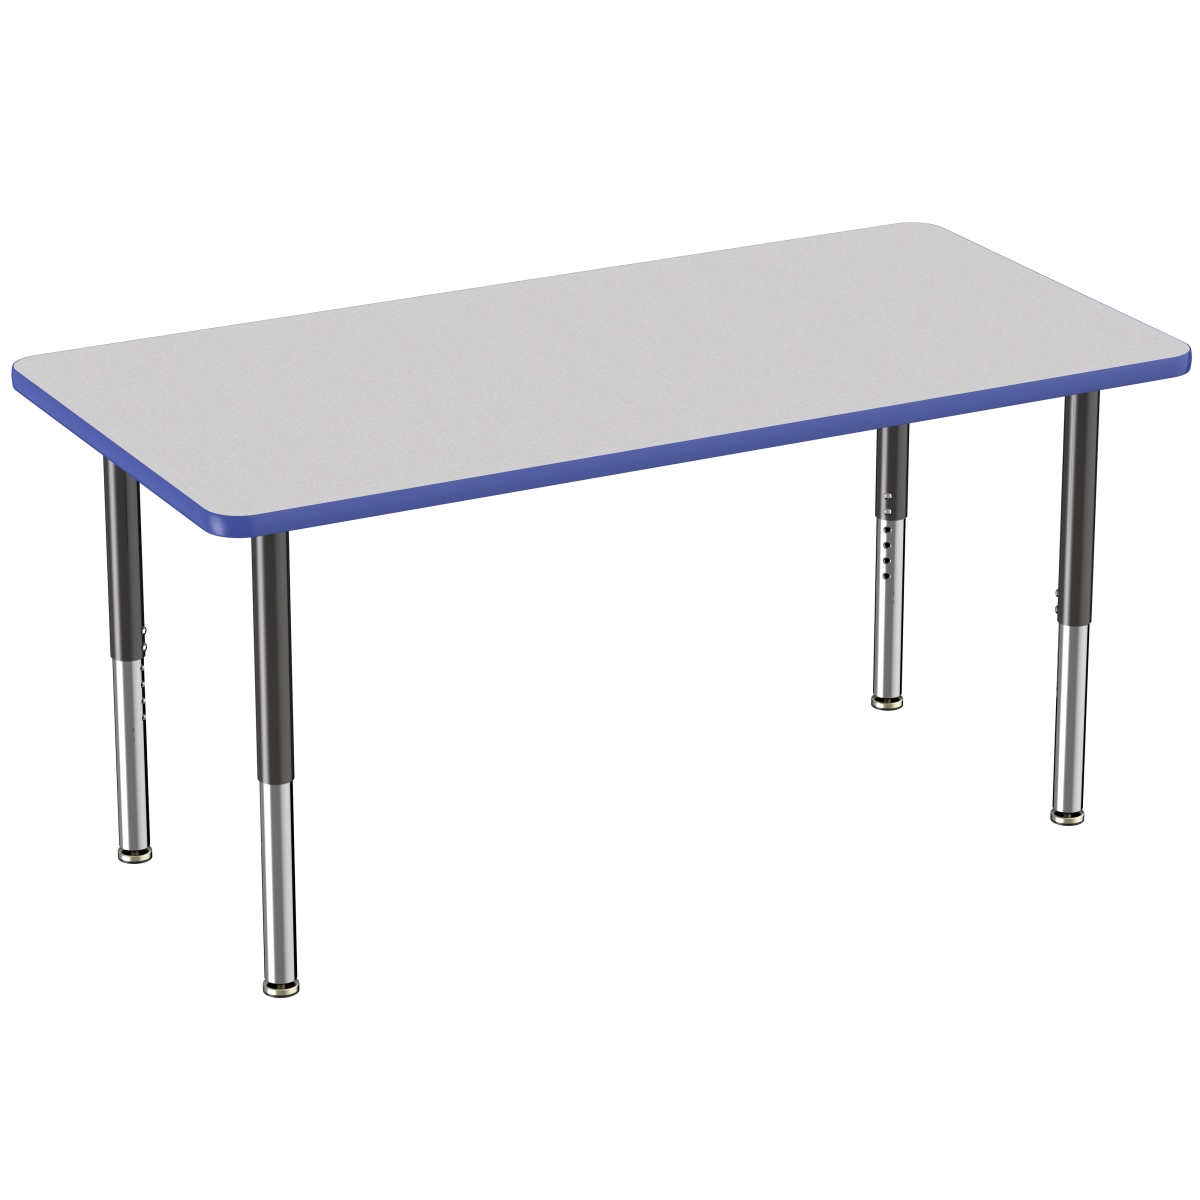 10026-gybl 30 X 60 In. Rectangle T-mold Adjustable Activity Table With Super Leg - Grey & Blue